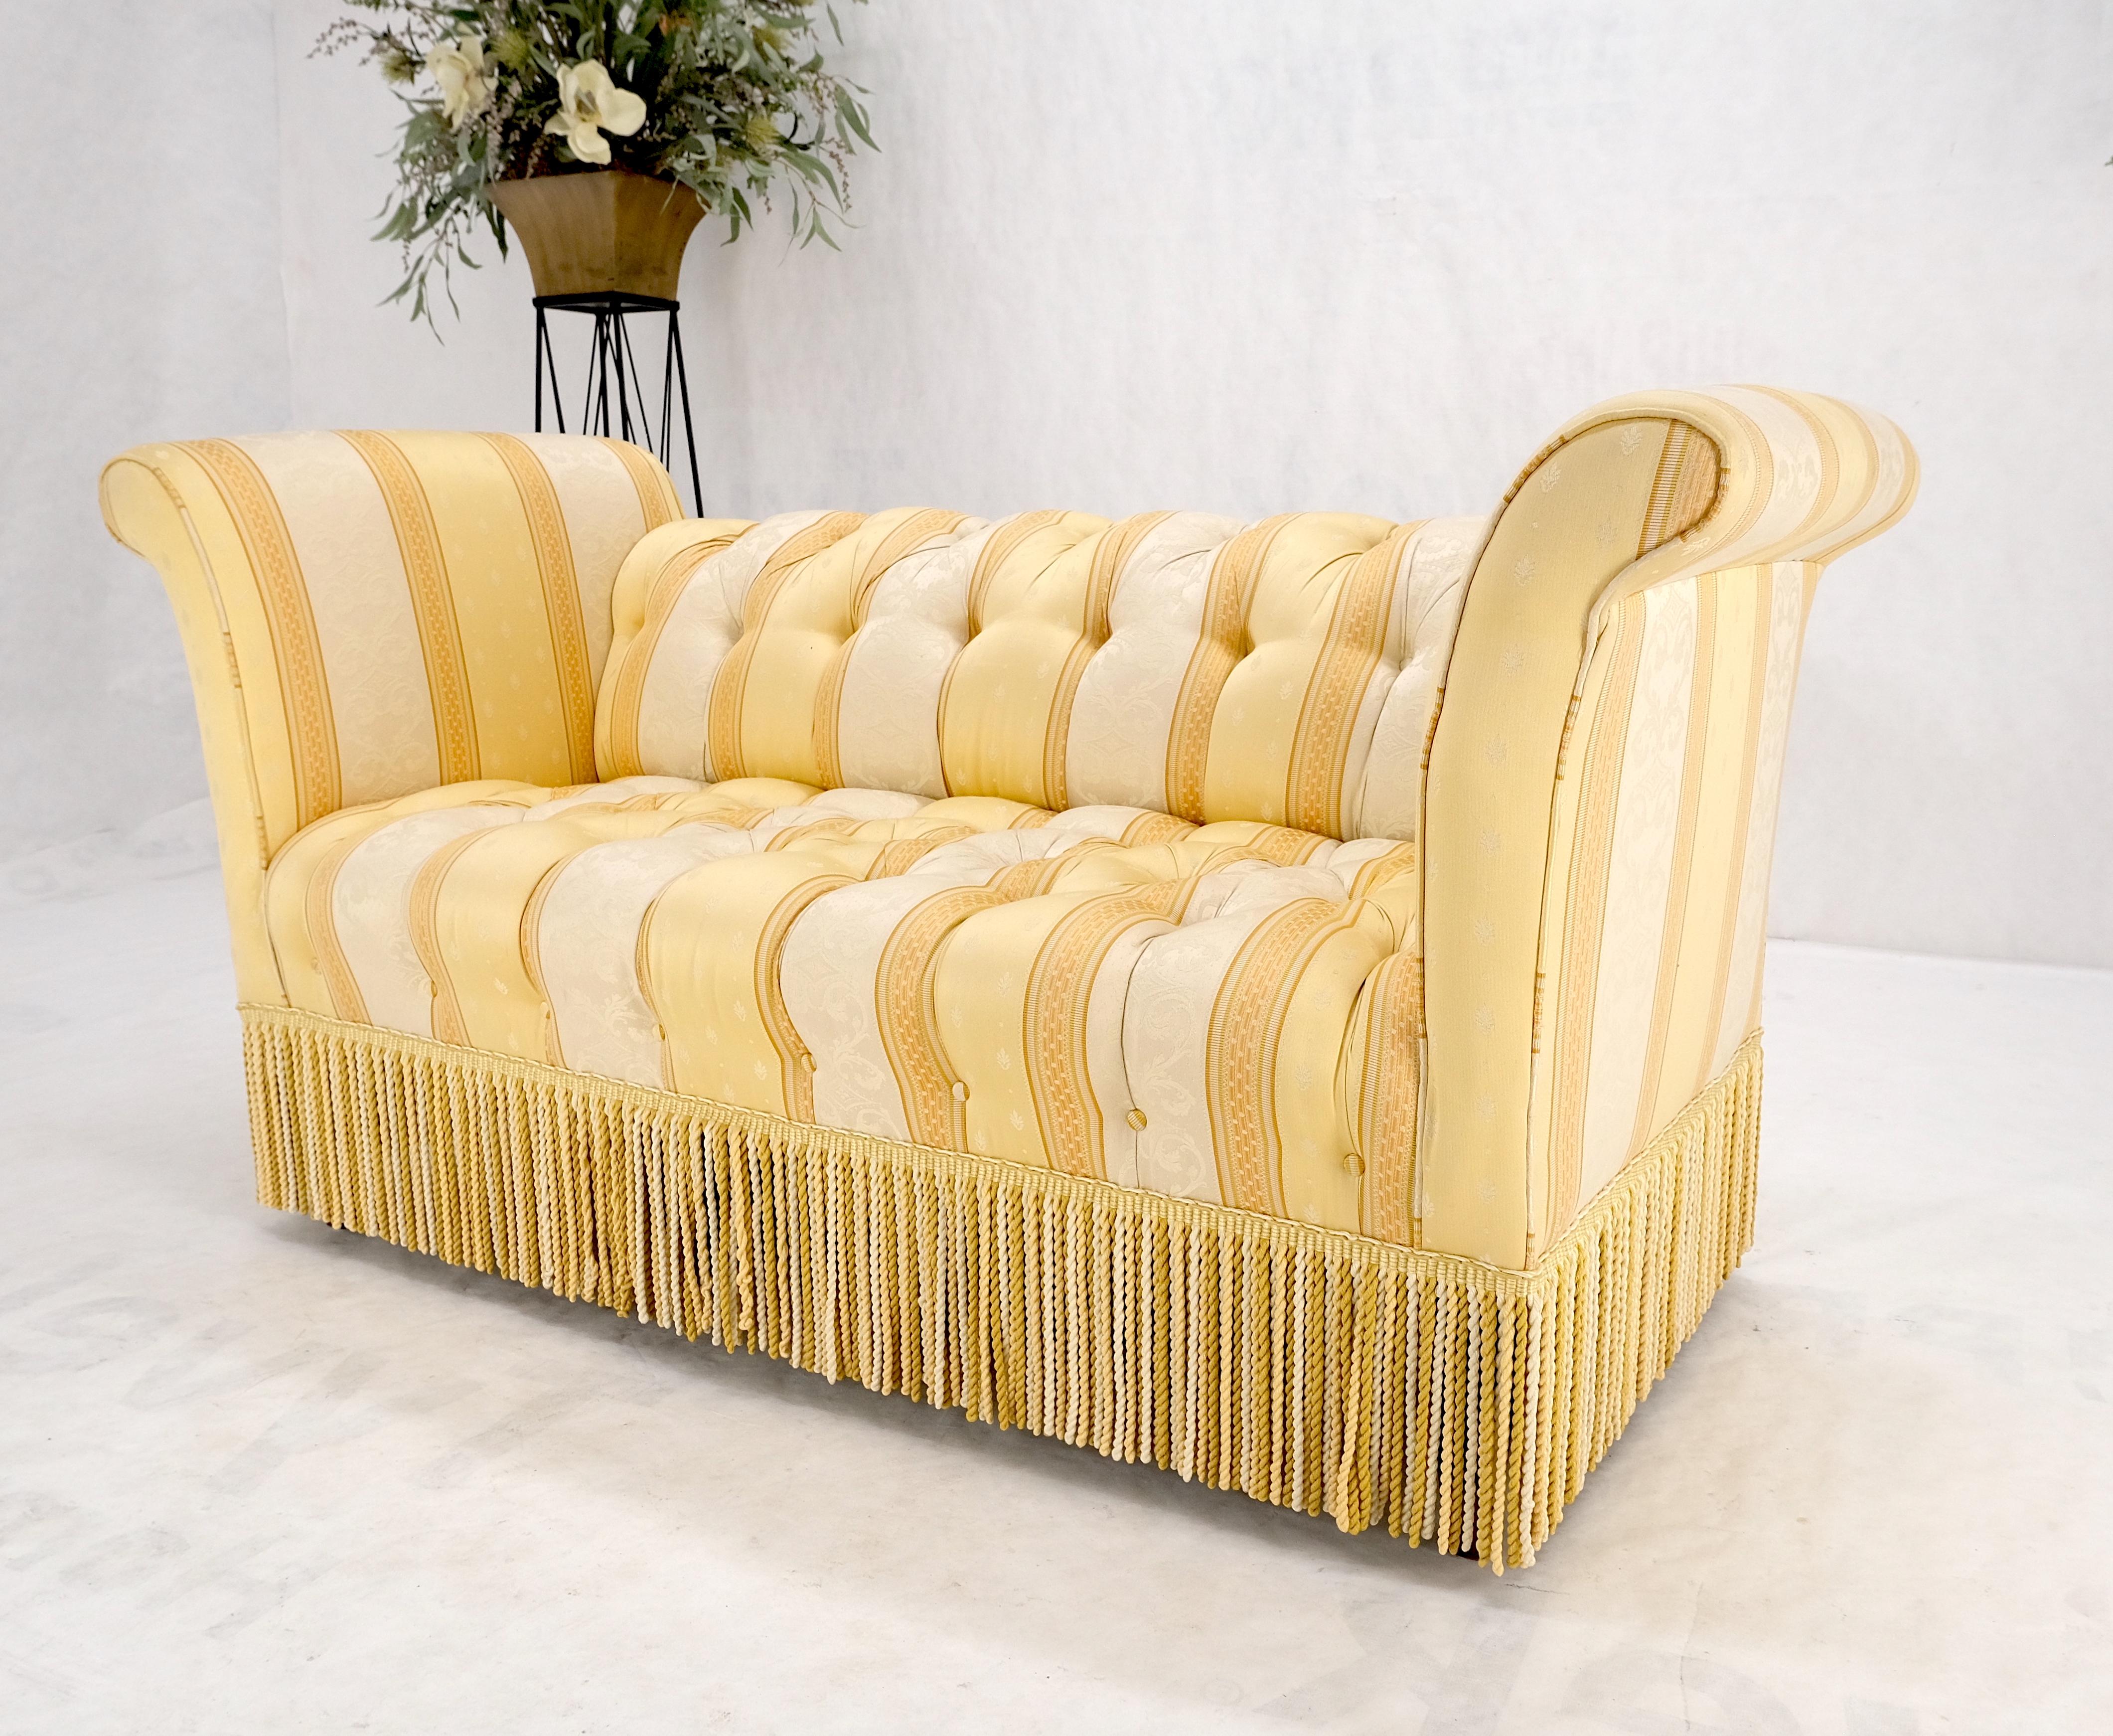 Gold & White Stripe Silk Upholstery Tufted Sofa Loveseat Tassels Decorated MINT! In Excellent Condition For Sale In Rockaway, NJ